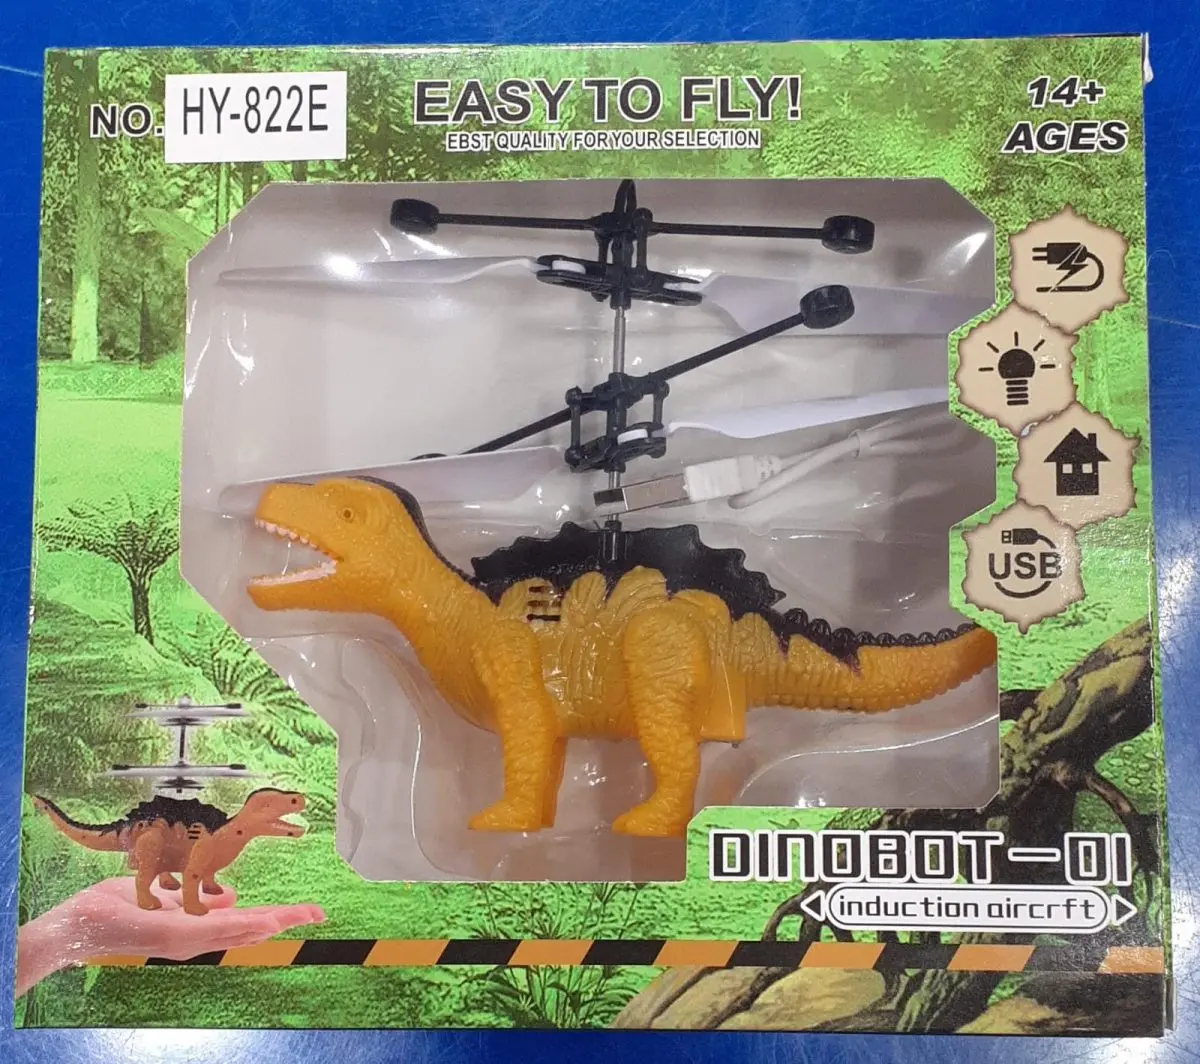 Dinosaur Flyer - Induction RC Dinosaur Flying Toy,Flying Figurines Dinosaur Model Toys Collection Party Favors Supplies Cake Toppers Set Toys for Boys Girls Kids